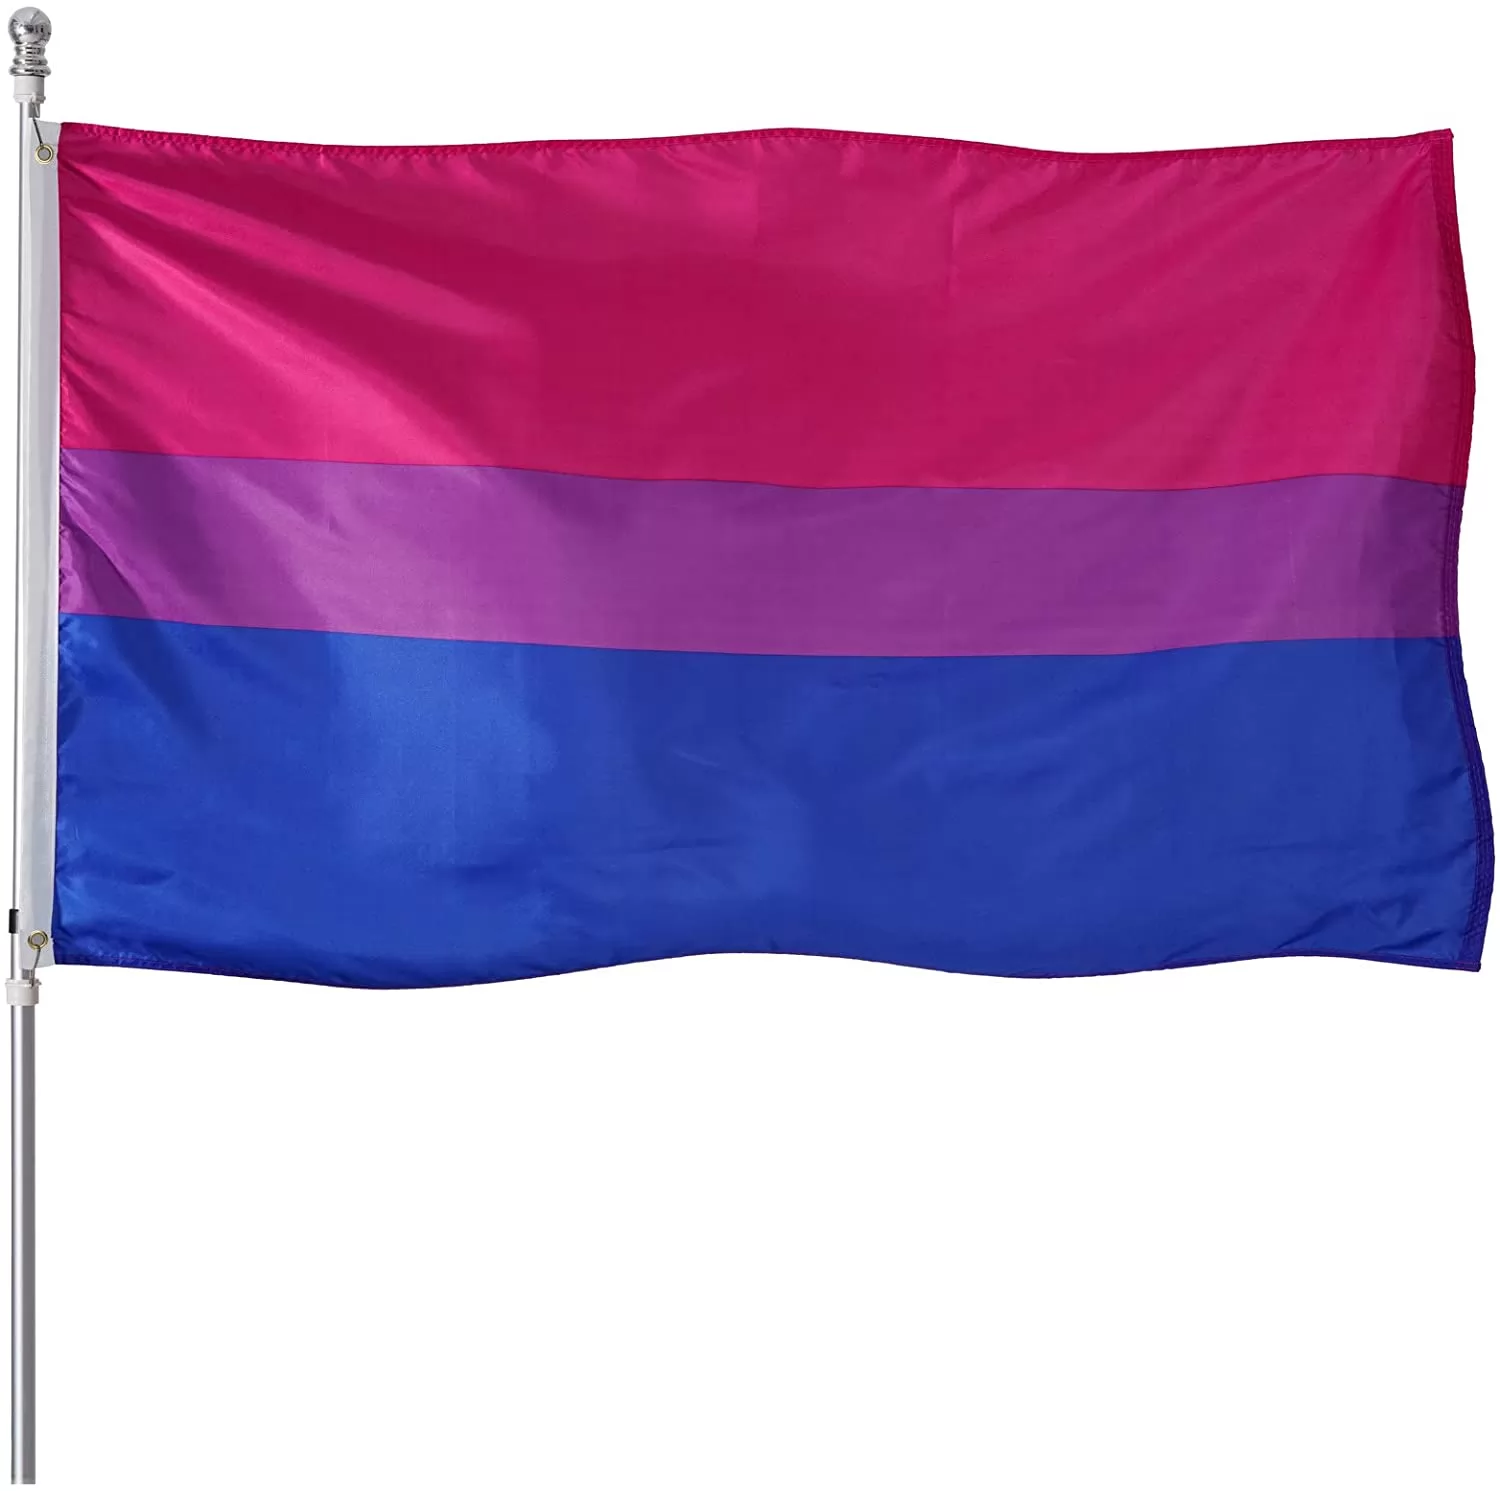 Homissor Bisexual BI Gay Pride Flag 3x5 Heavy Duty Polyester LGBT Rainbow Equality Flags for Outdoor Wall with Brass Grommets & Durable Header